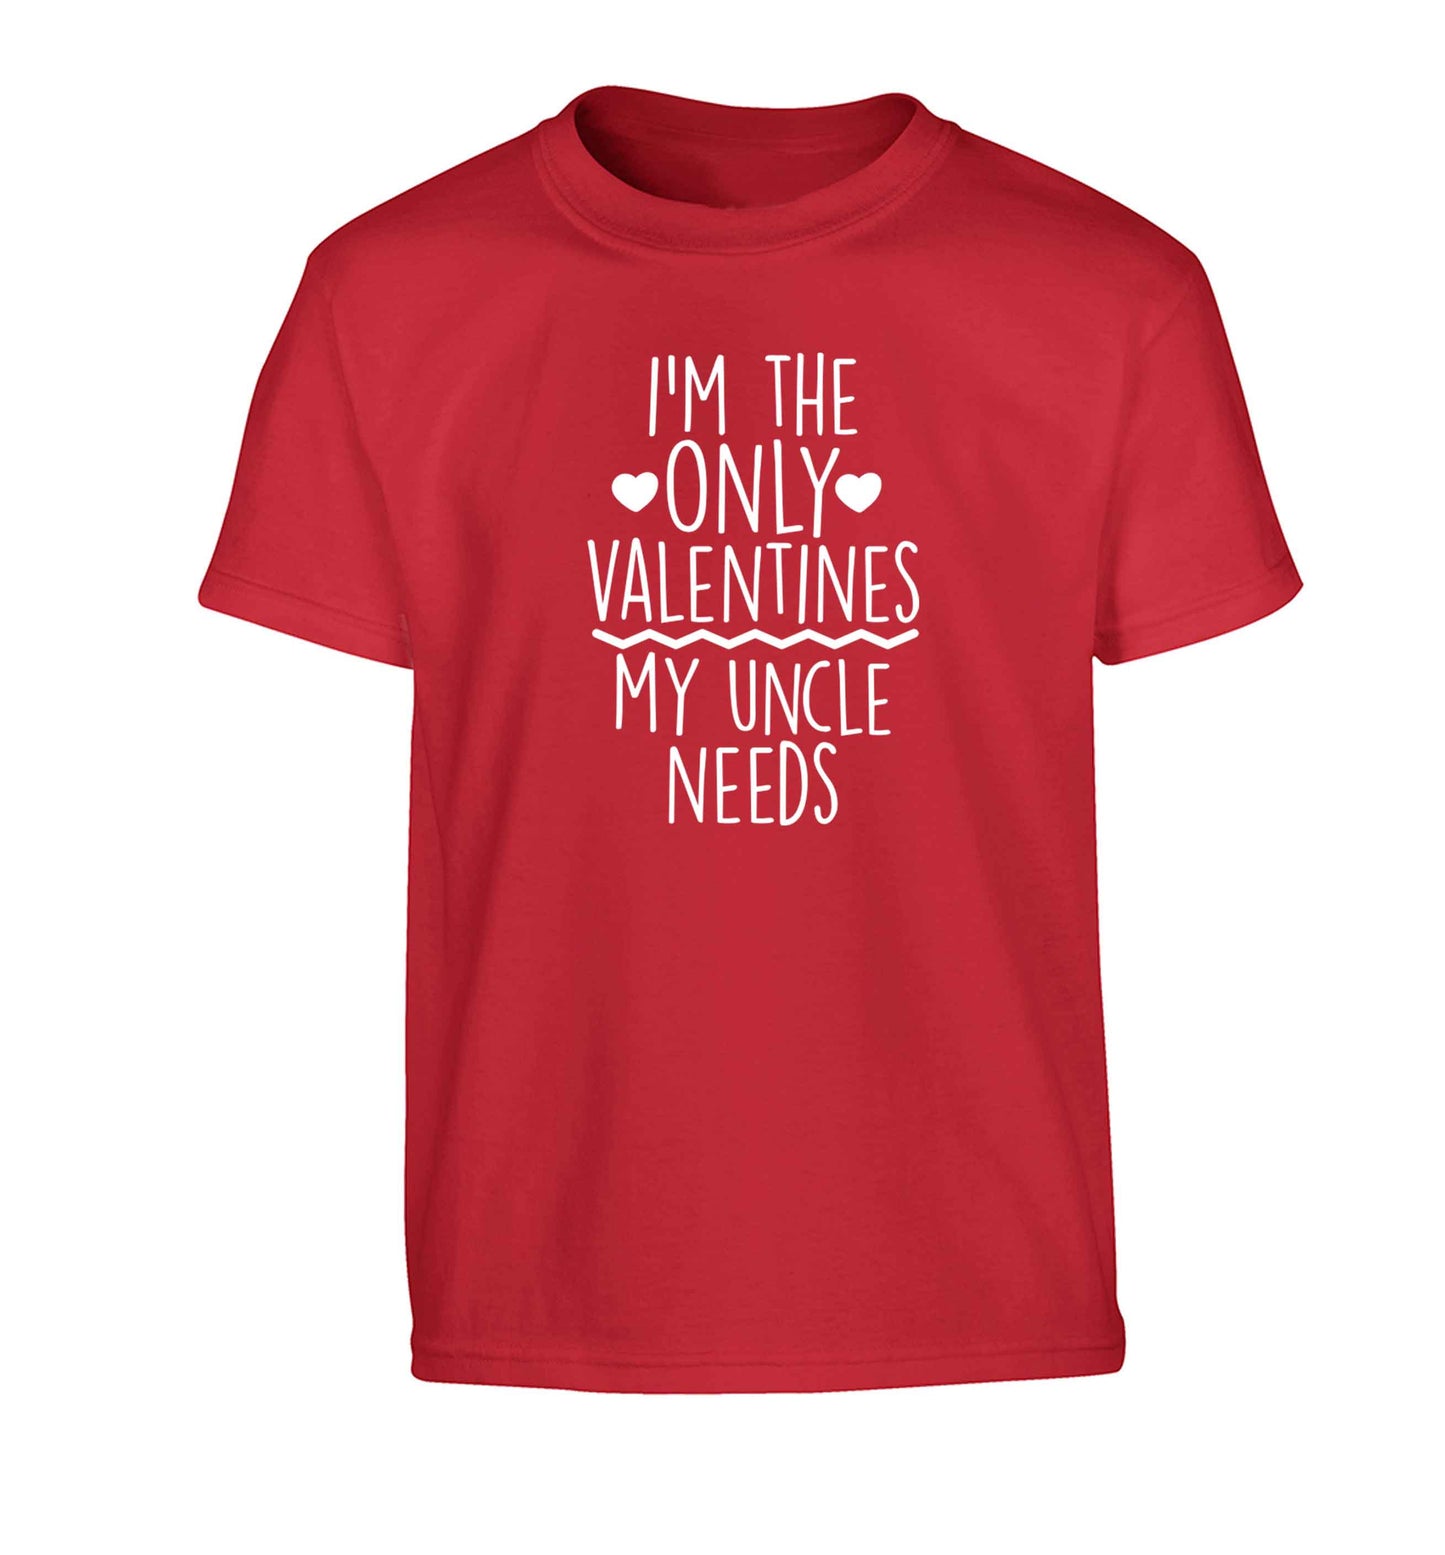 I'm the only valentines my uncle needs Children's red Tshirt 12-13 Years